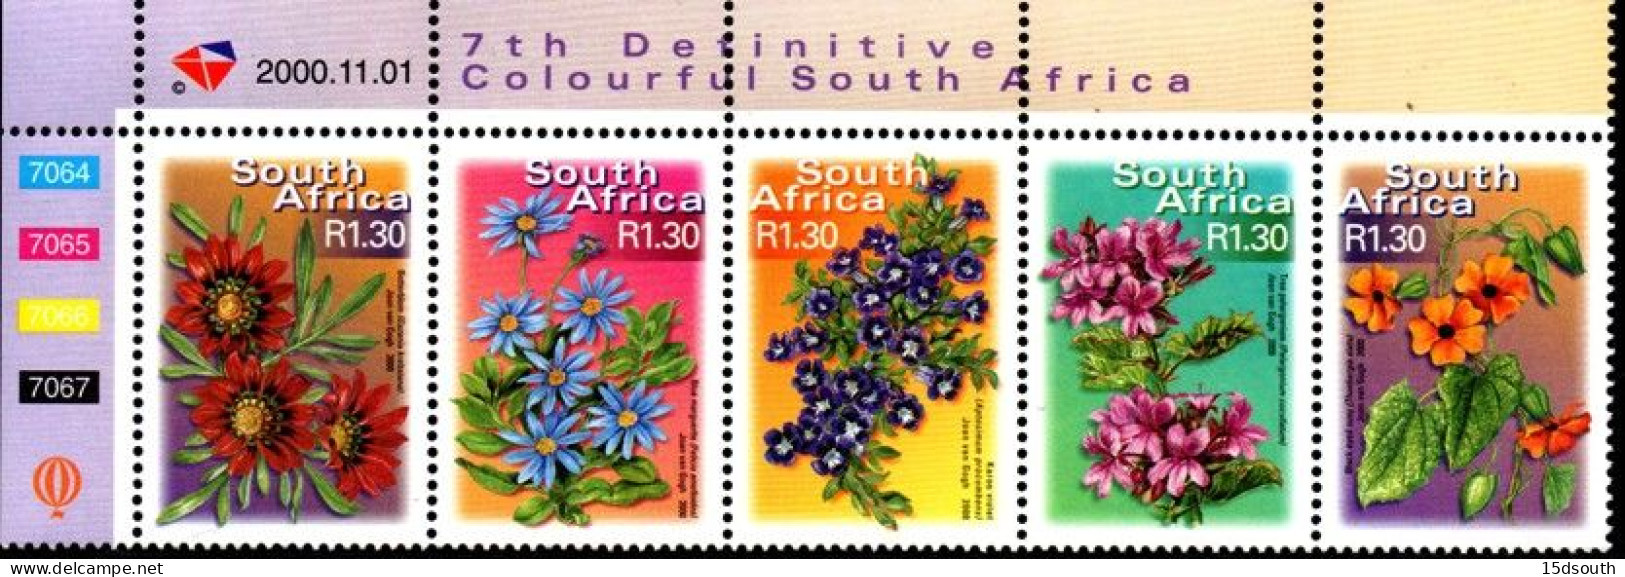 South Africa - 2000 7th Definitive Fauna And Flora R1.30 Control Block (**) (2000.11.01) - Blocs-feuillets